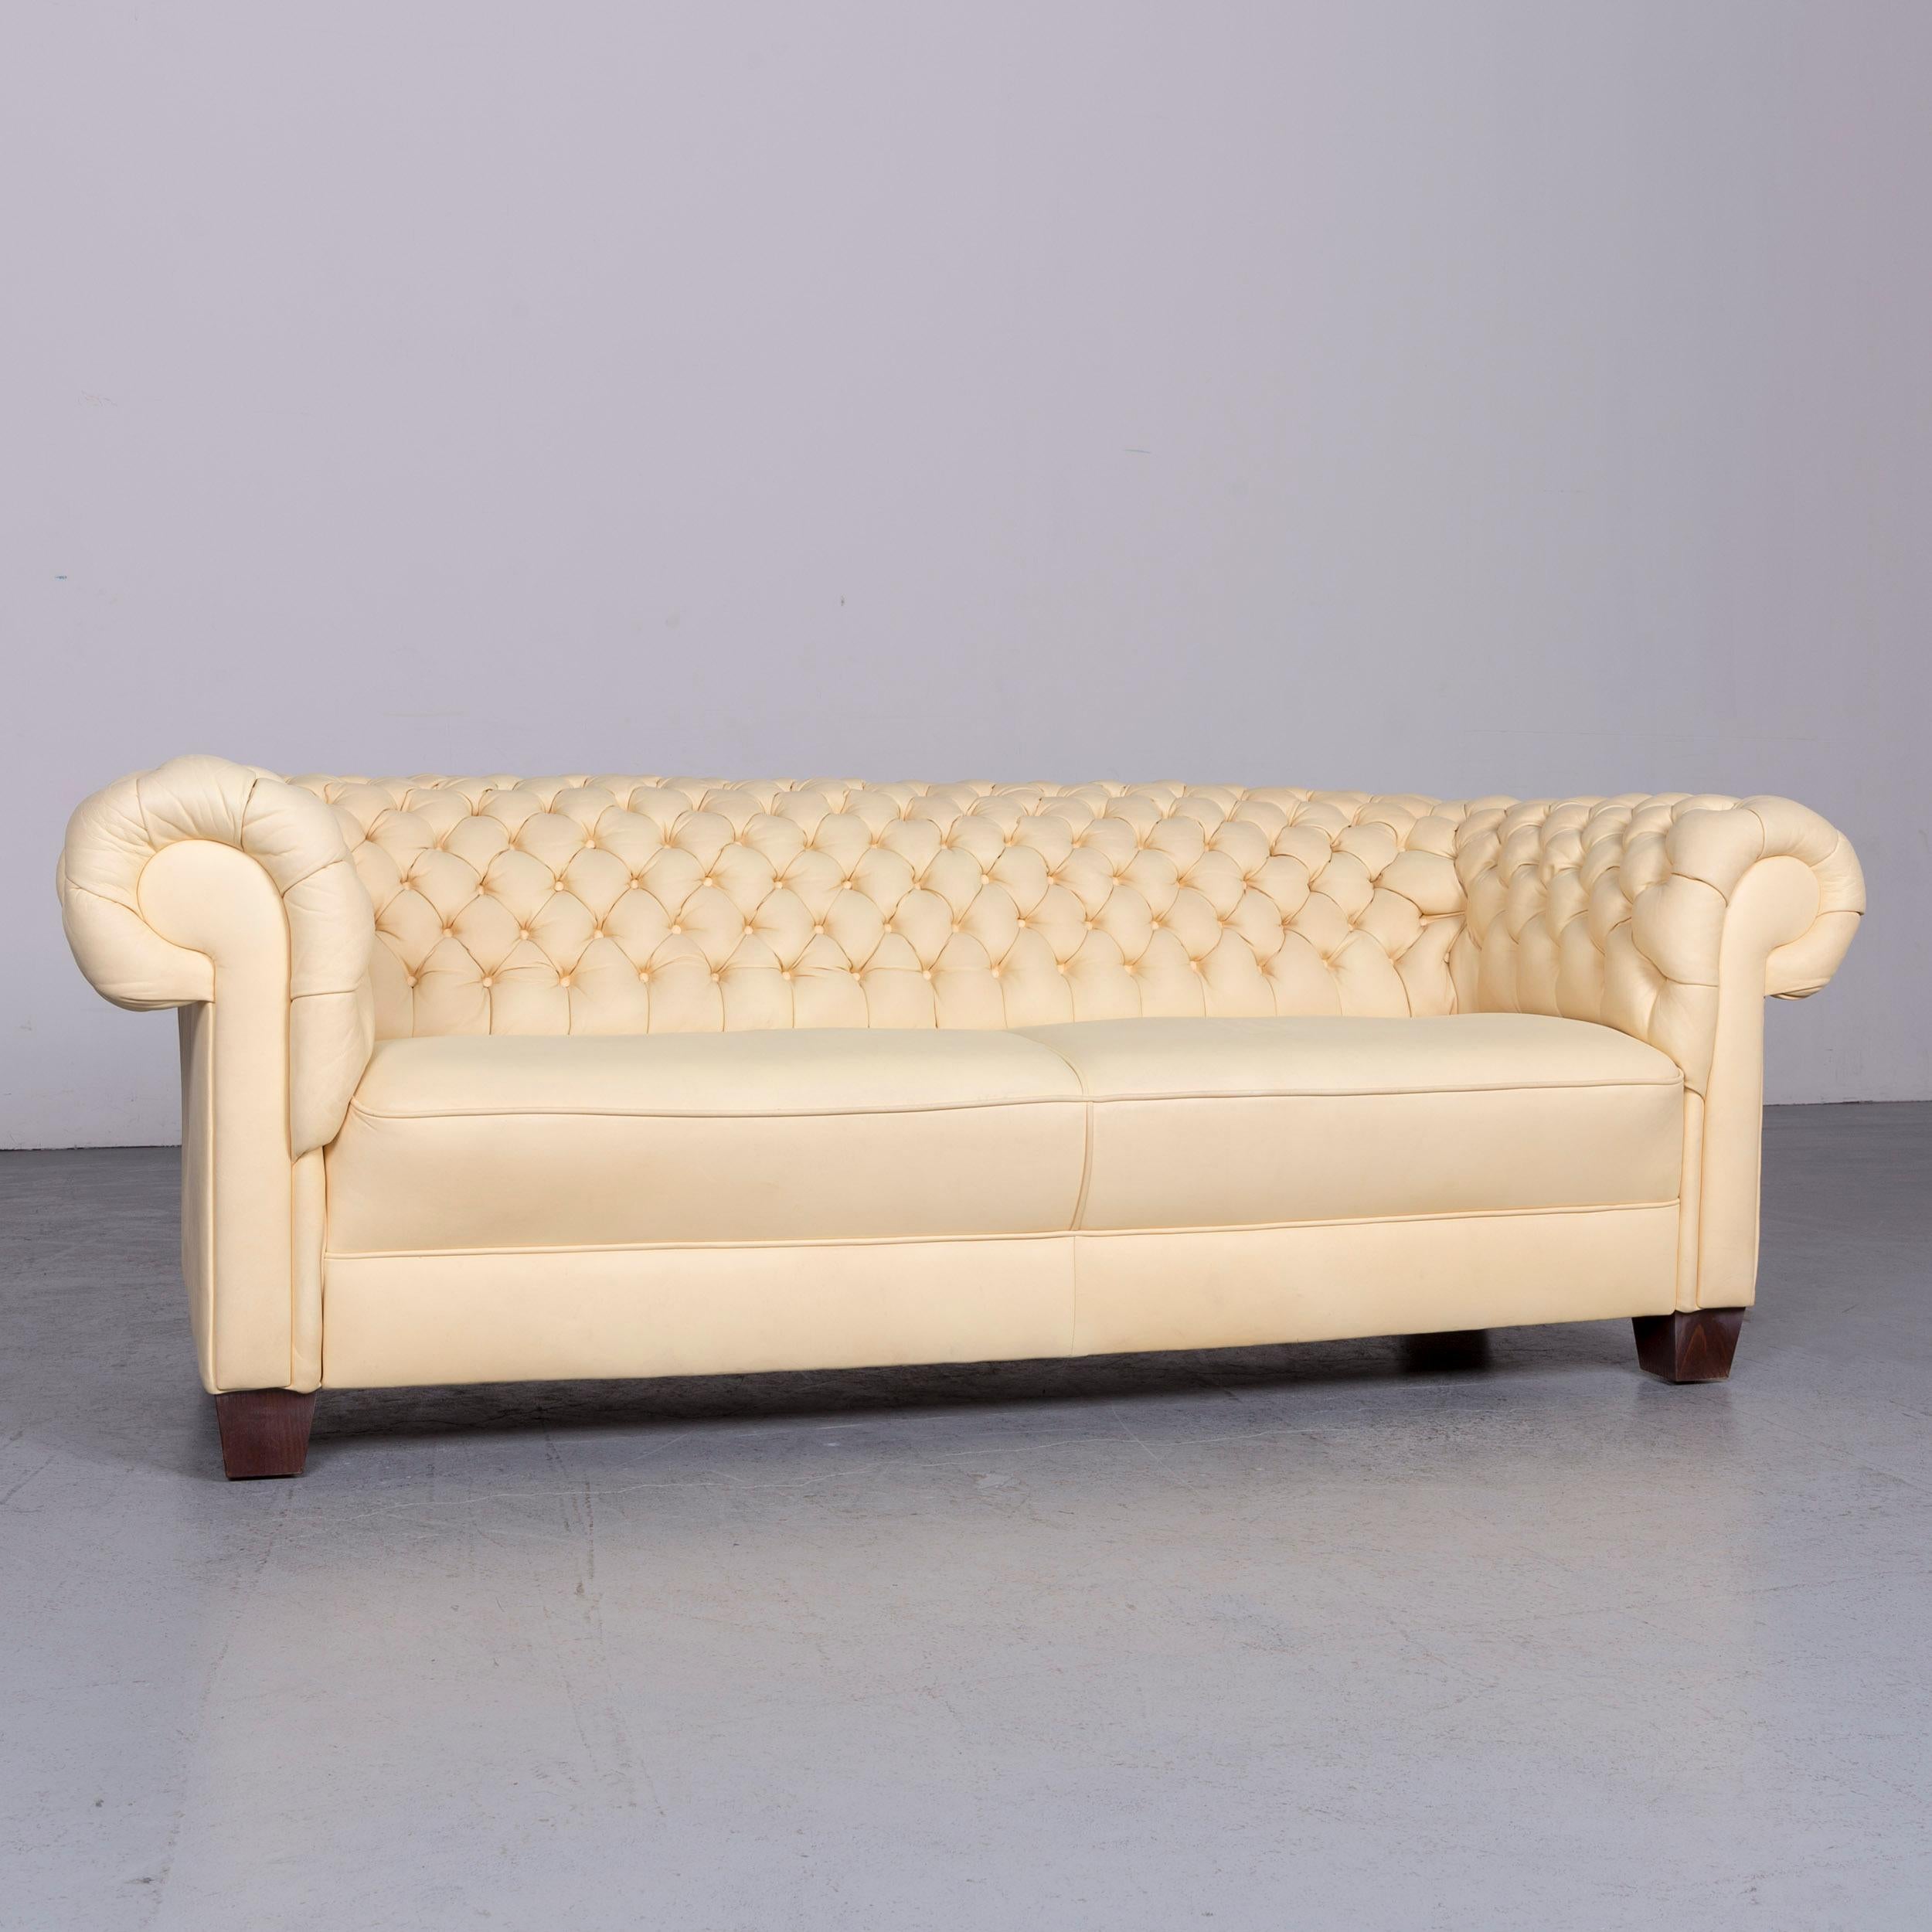 We bring to you an Chesterfield leather sofa set crème three-seat couch.





























